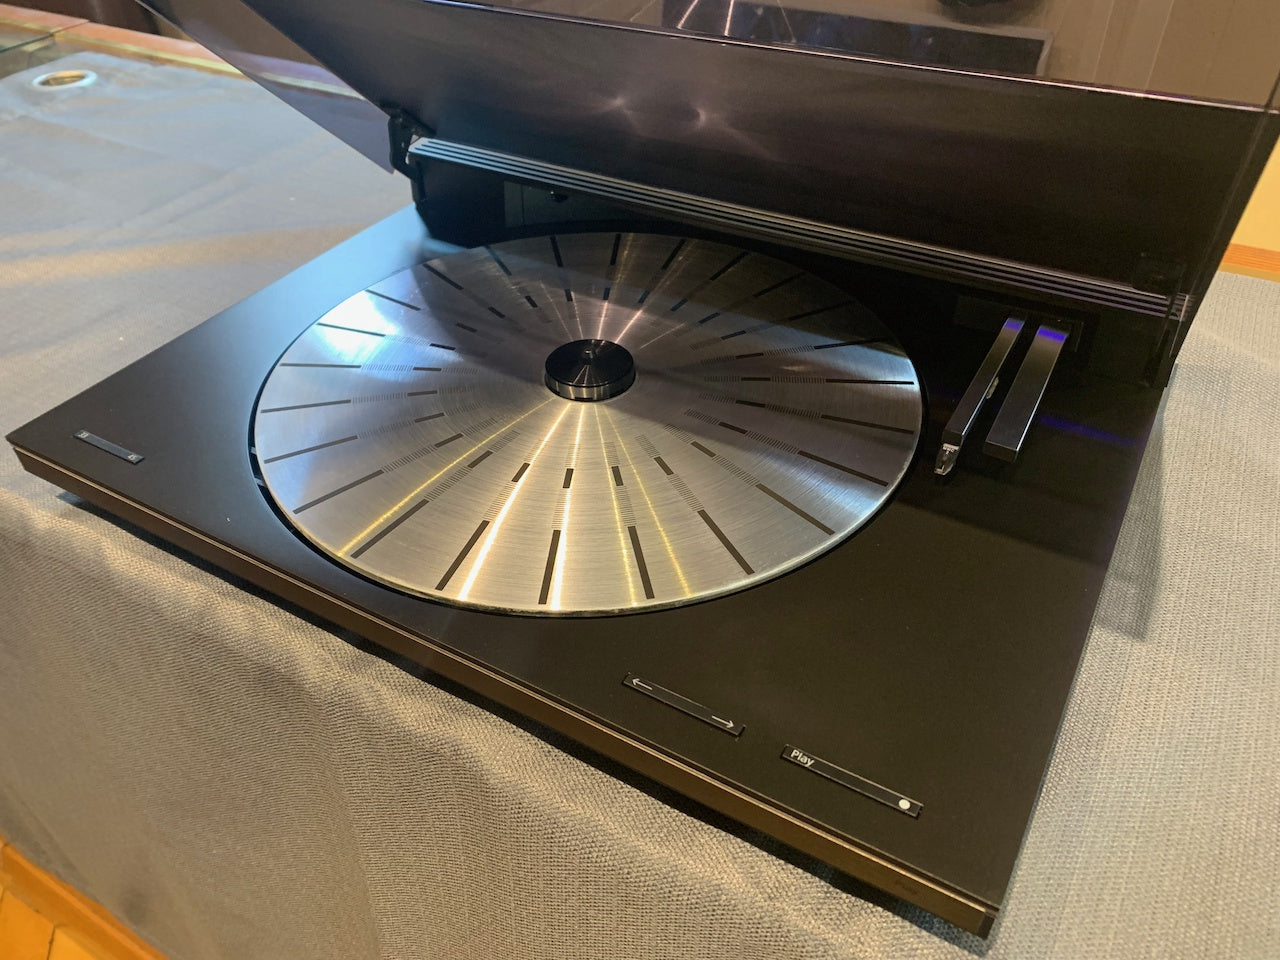 Bang & Olufsen Beogram 9000 * Linear Tracking Turntable with MMC2 Cartridge